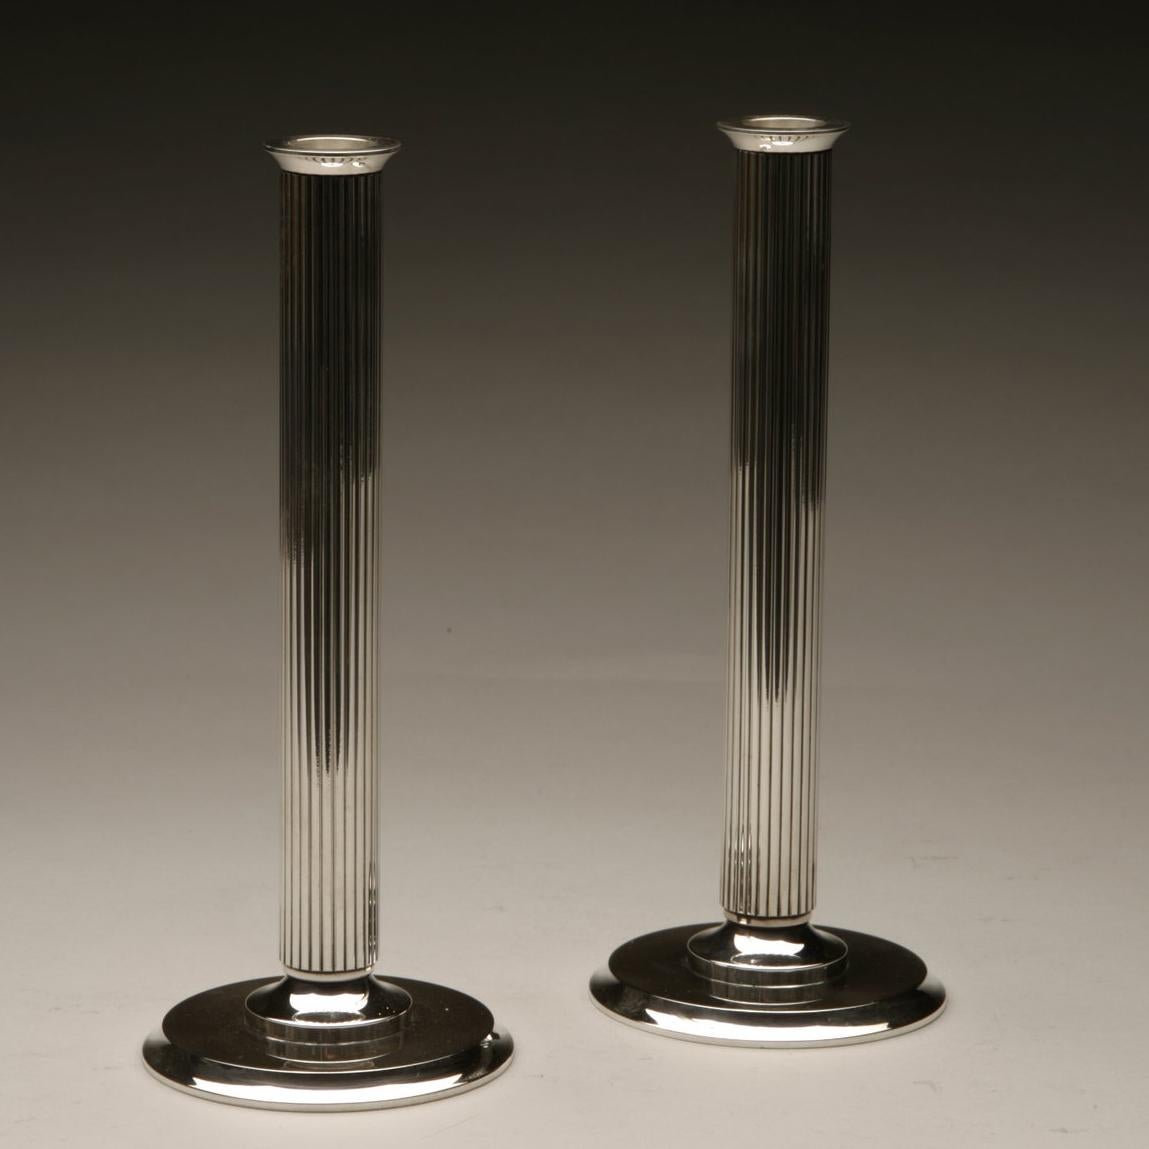 Price is for the pair but these candlesticks can also be ordered individually.

The stem of this candlestick is a tube which has been pulled through a so-called draw plate which makes the lines. The base is an assemblage of four individually made